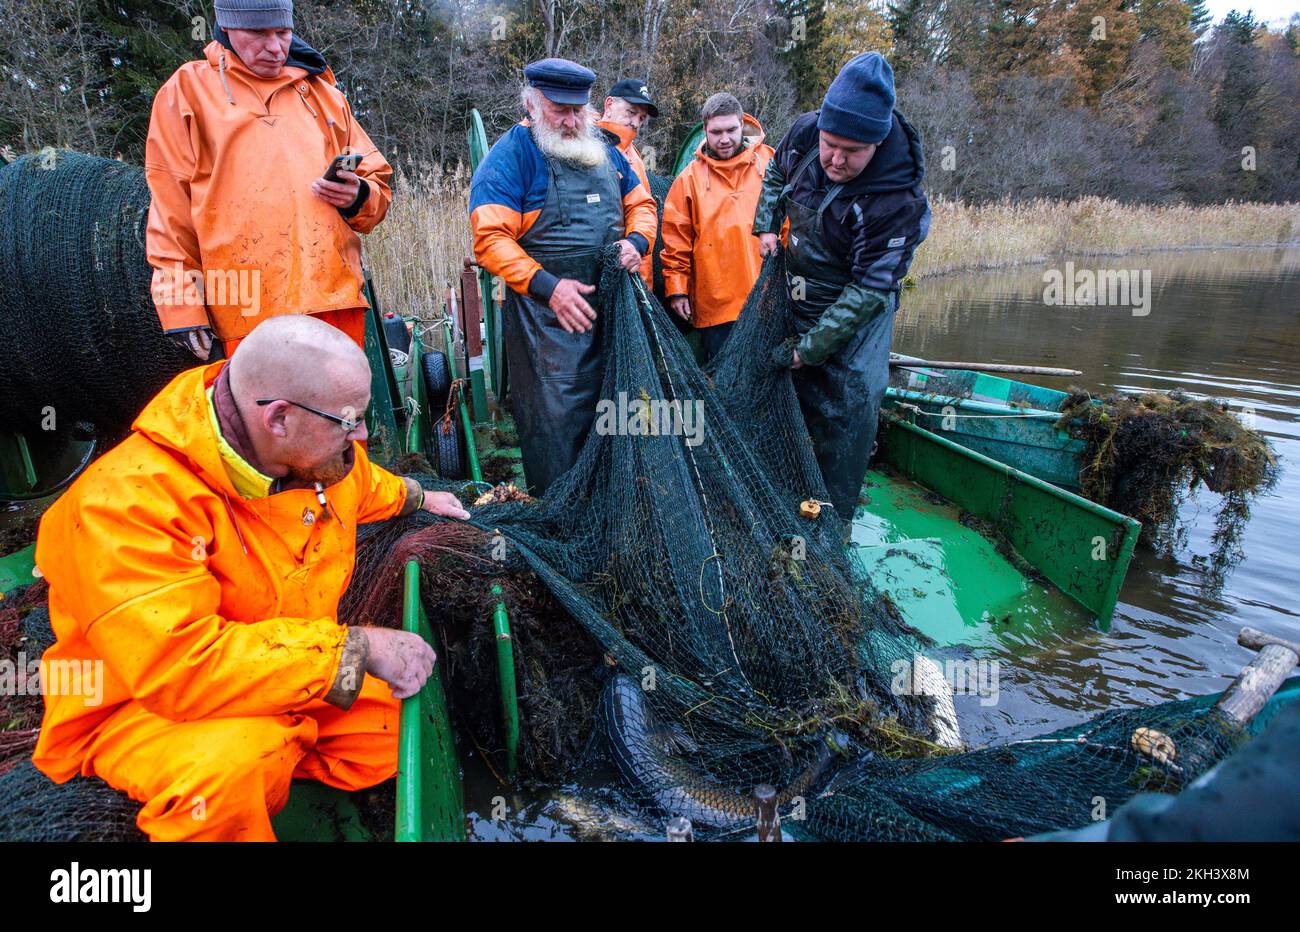 https://c8.alamy.com/comp/2KH3X8M/alt-schlagsdorf-germany-19th-nov-2022-fisherman-walter-piehl-center-and-his-helpers-take-the-hauling-net-out-of-the-water-of-lake-neuschlagsdorf-three-weeks-after-the-start-of-the-carp-season-however-the-christmas-carp-are-not-yet-going-into-the-net-in-mecklenburg-only-grass-carp-and-pike-are-wriggling-in-the-fishing-gear-the-weather-is-too-warm-and-the-fish-are-still-too-agile-walter-piehl-a-65-year-old-former-deep-sea-fisherman-is-one-of-the-very-few-fishermen-in-mecklenburg-western-pomerania-who-catch-carp-with-hauling-nets-in-natural-lakes-credit-jensdpaalamy-live-news-2KH3X8M.jpg